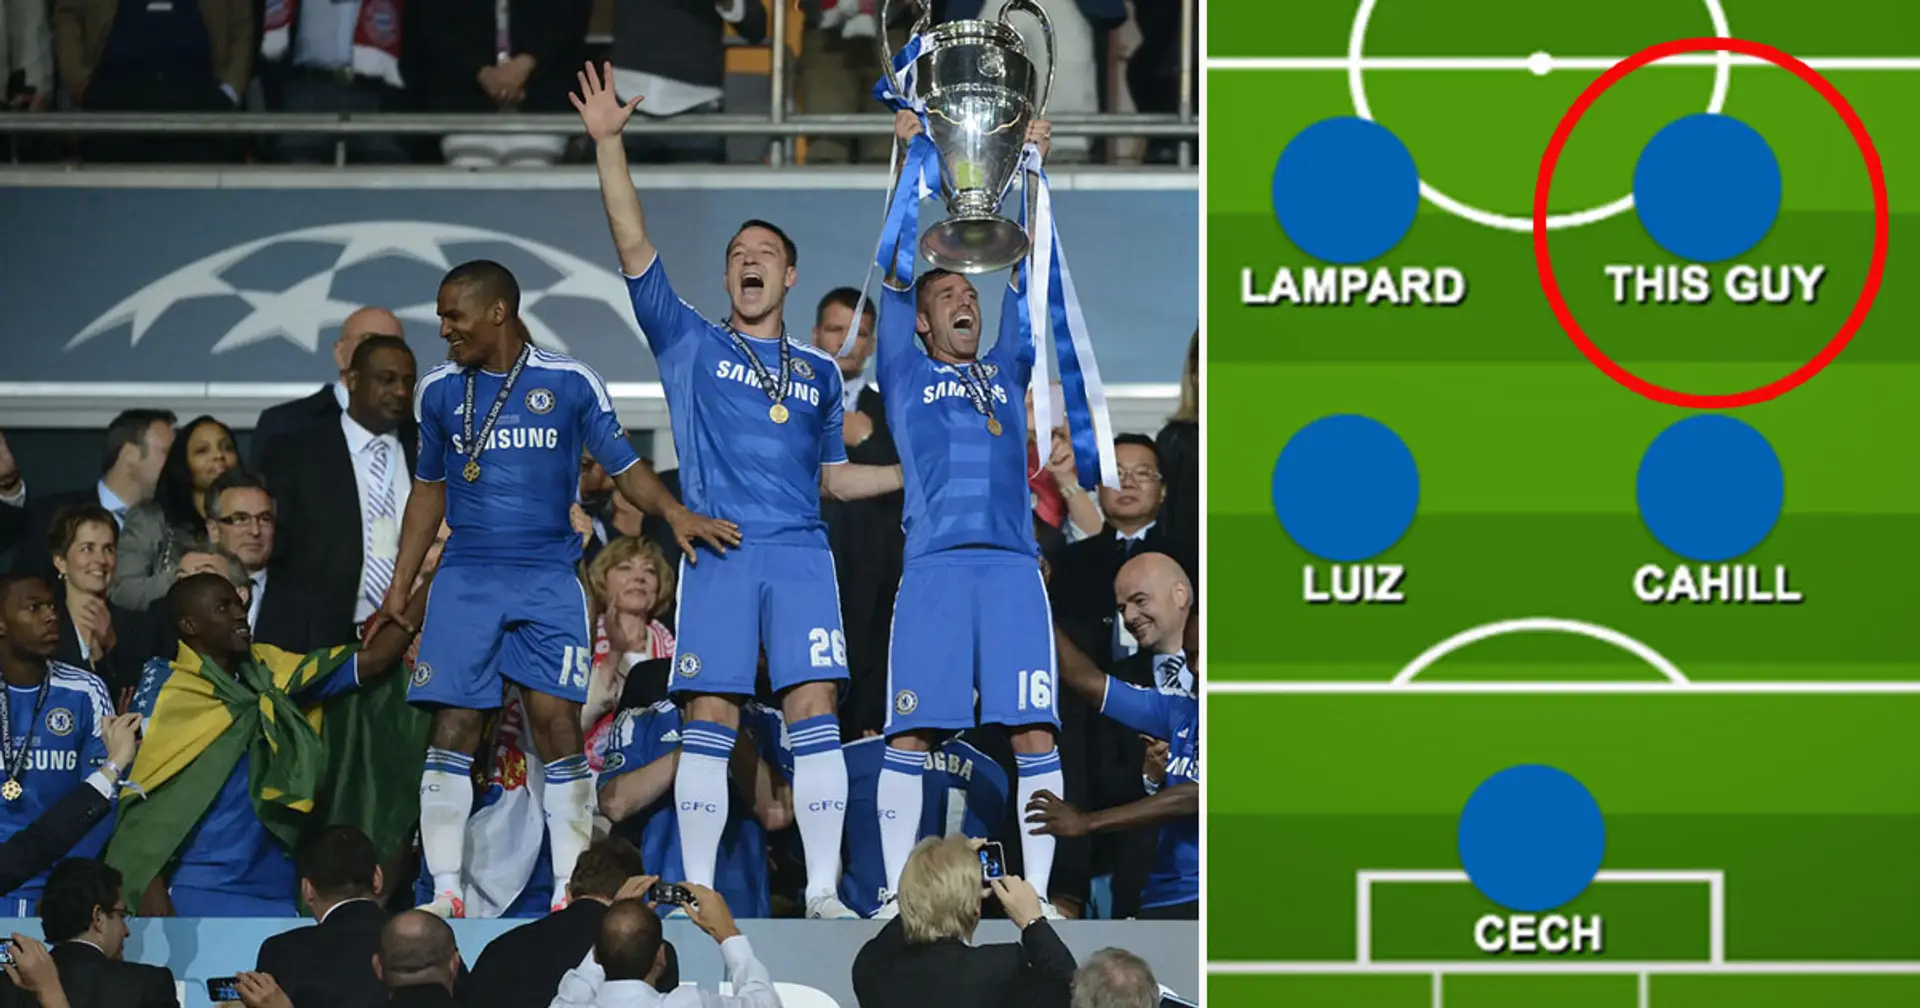 Who did 'dirty work' in Chelsea's 2012 Champions League triumph letting Drogba and Cech hit headlines?